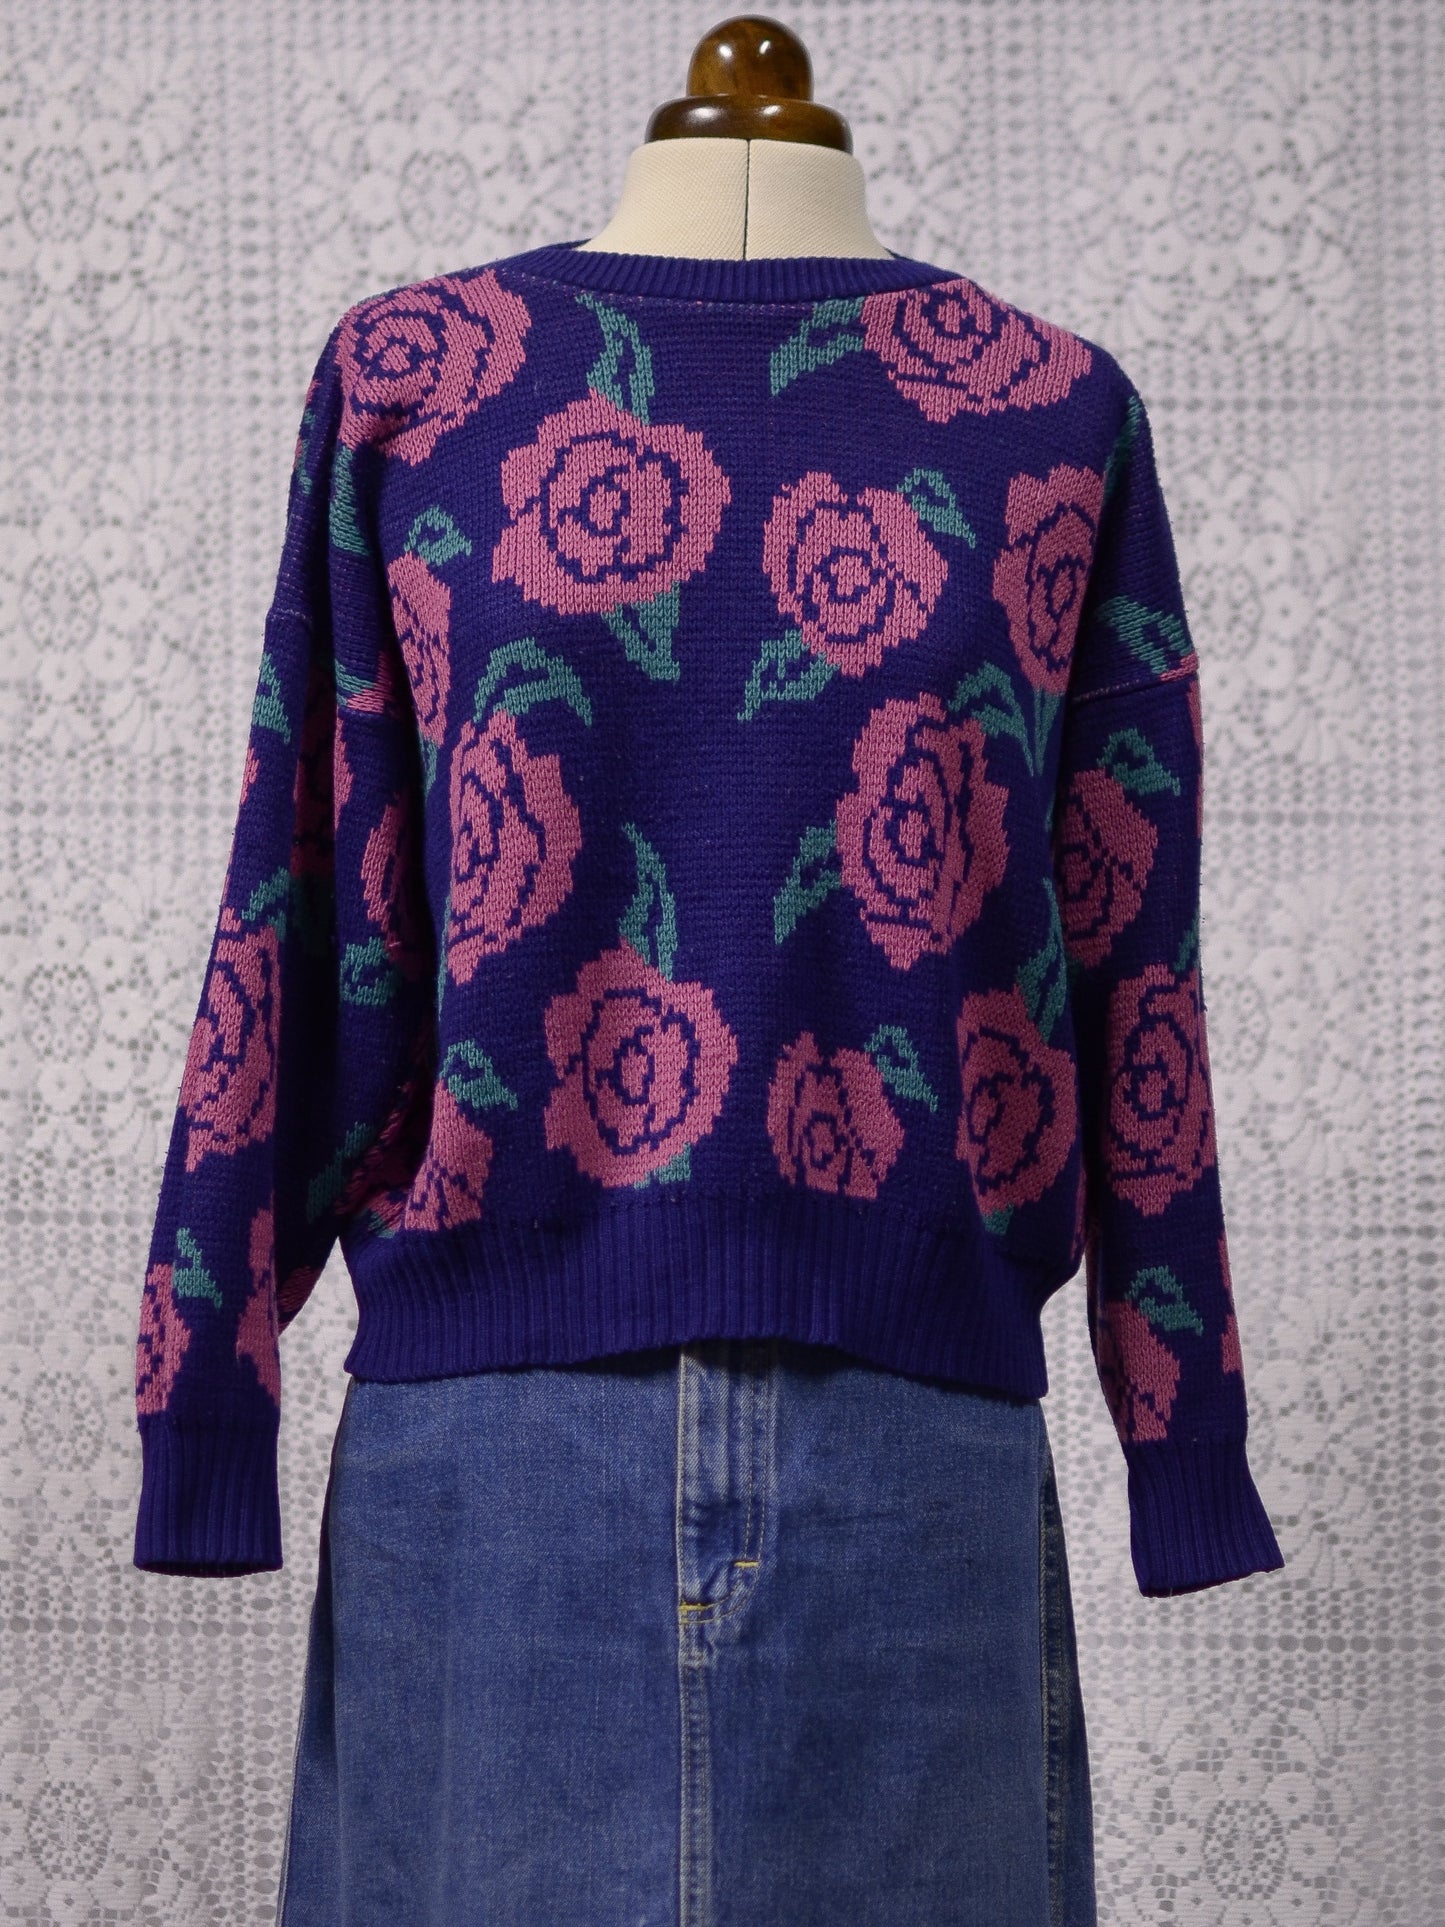 1980s navy blue and pink rose pattern jumper